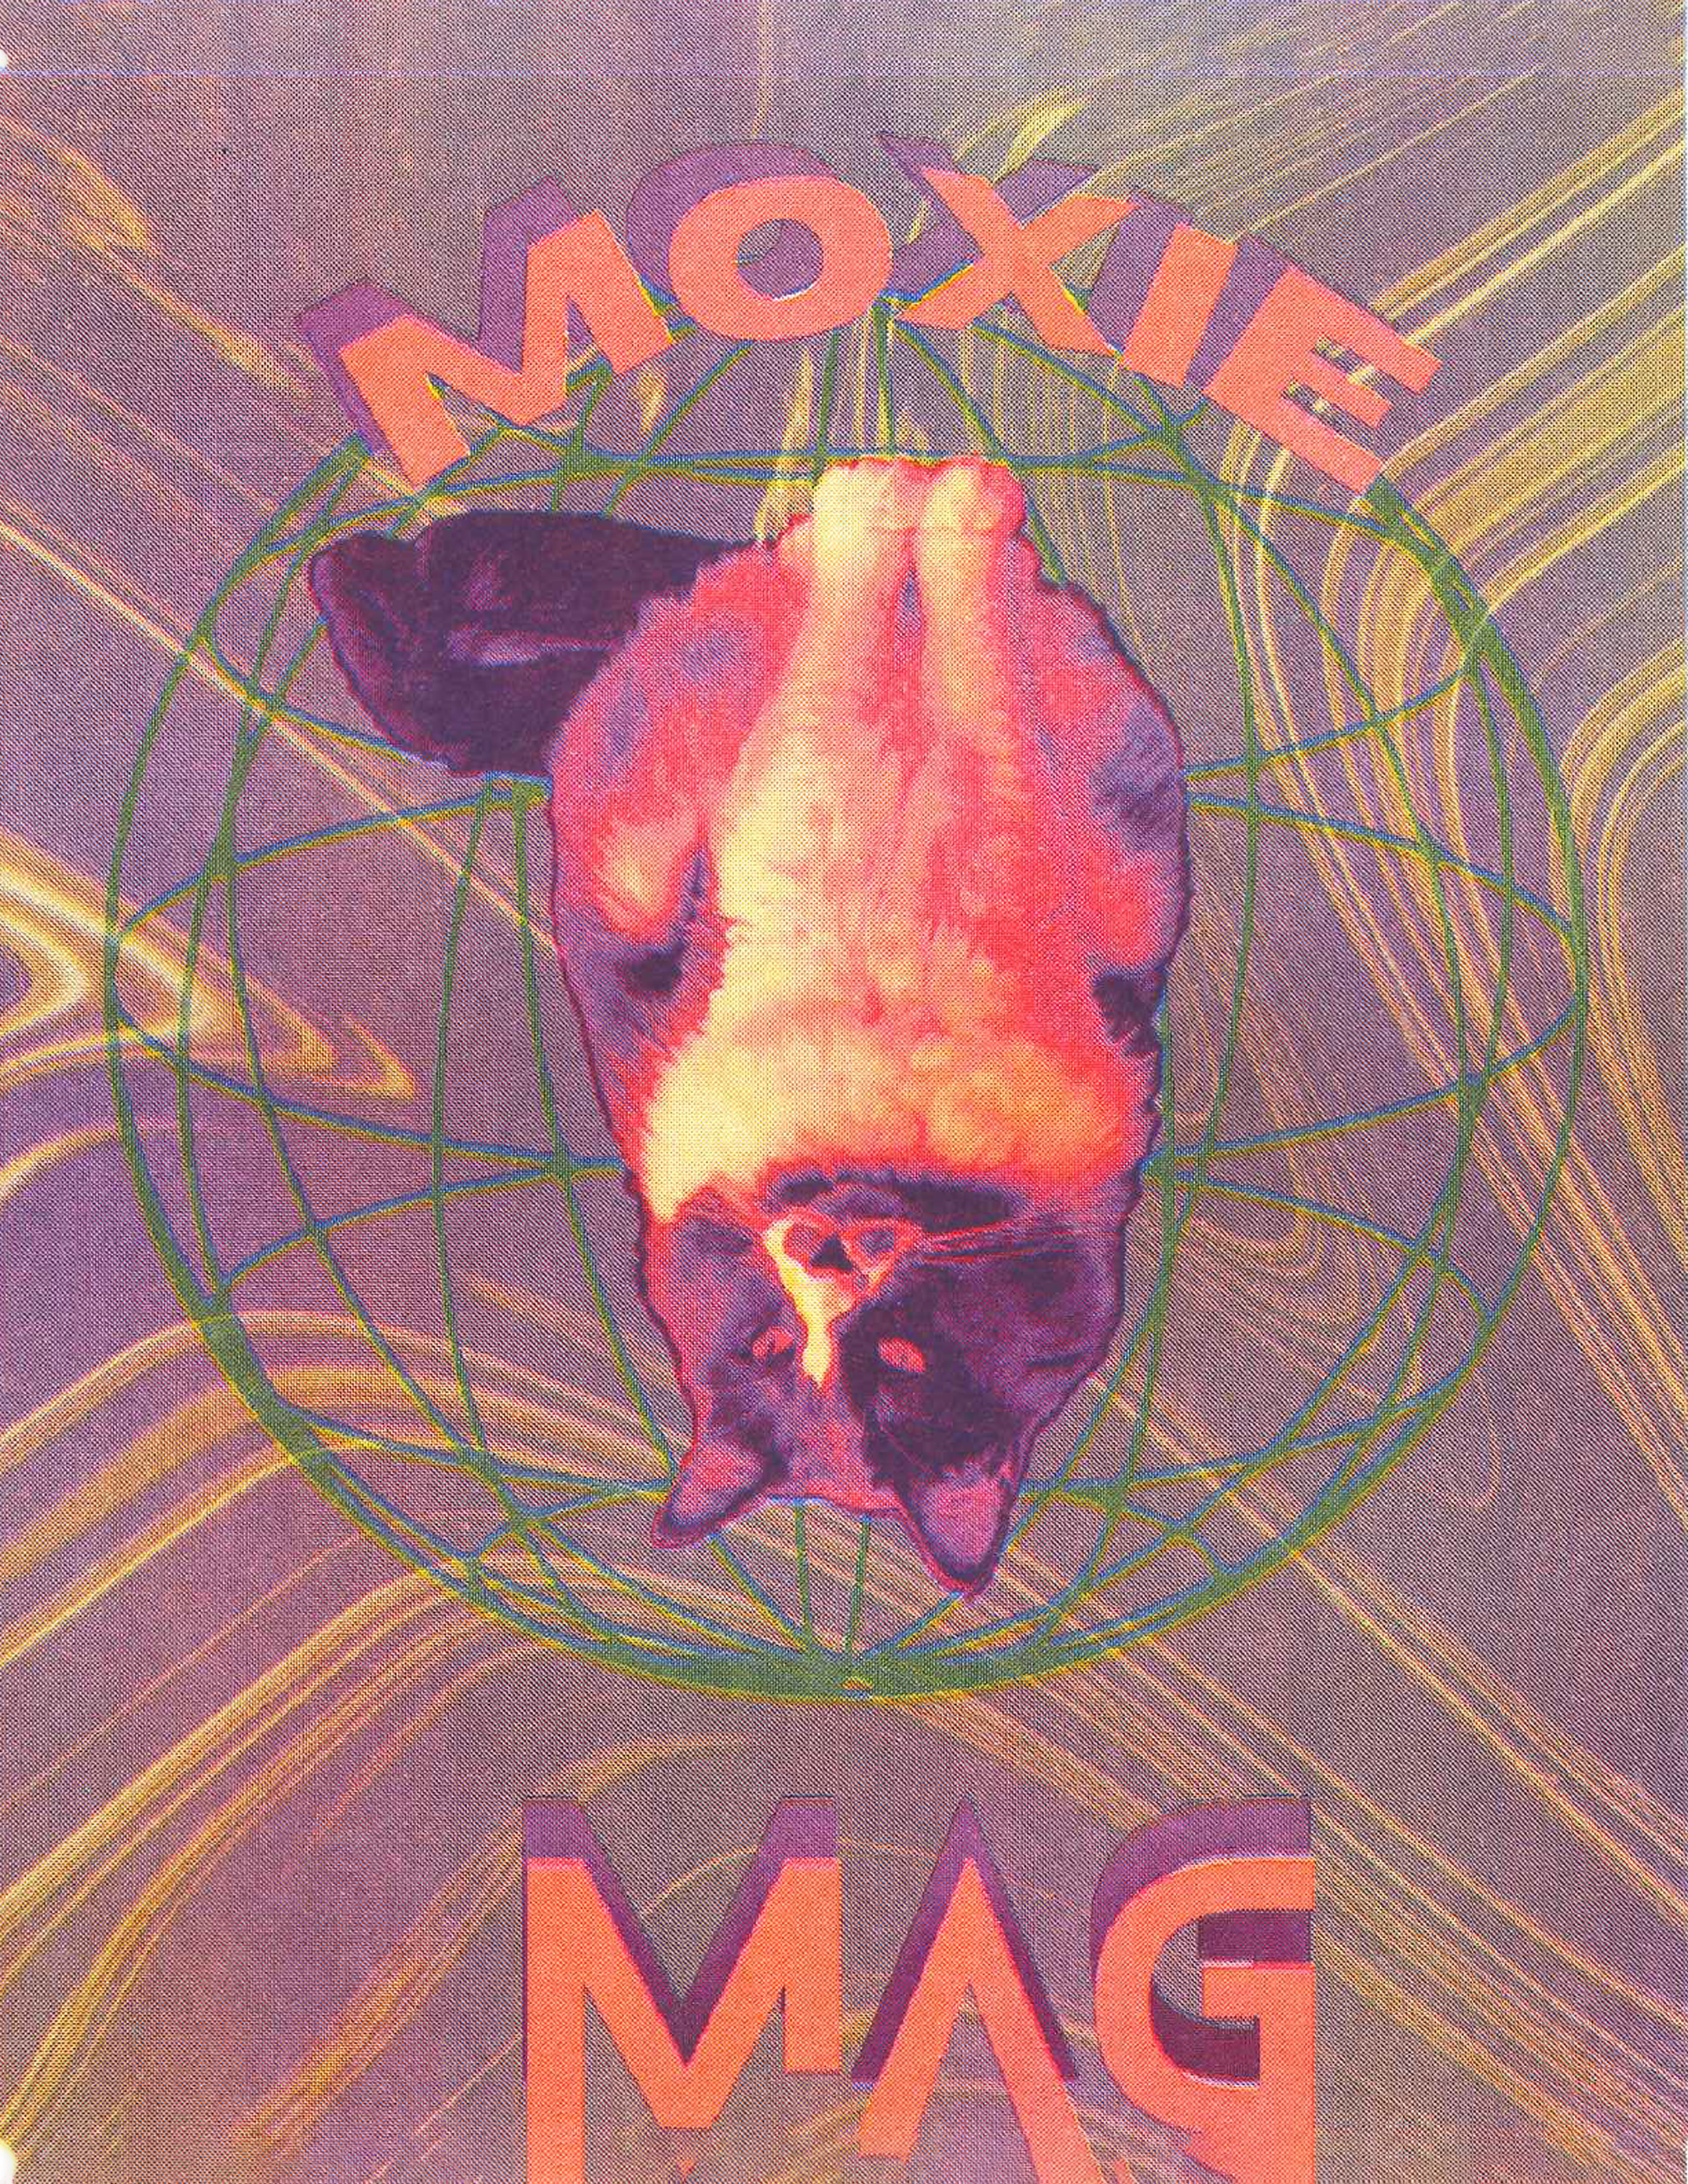 Cover of a magazine featuring a glitchy background and what looks like a cow head. Text overlay reads, "Moxie Mag"